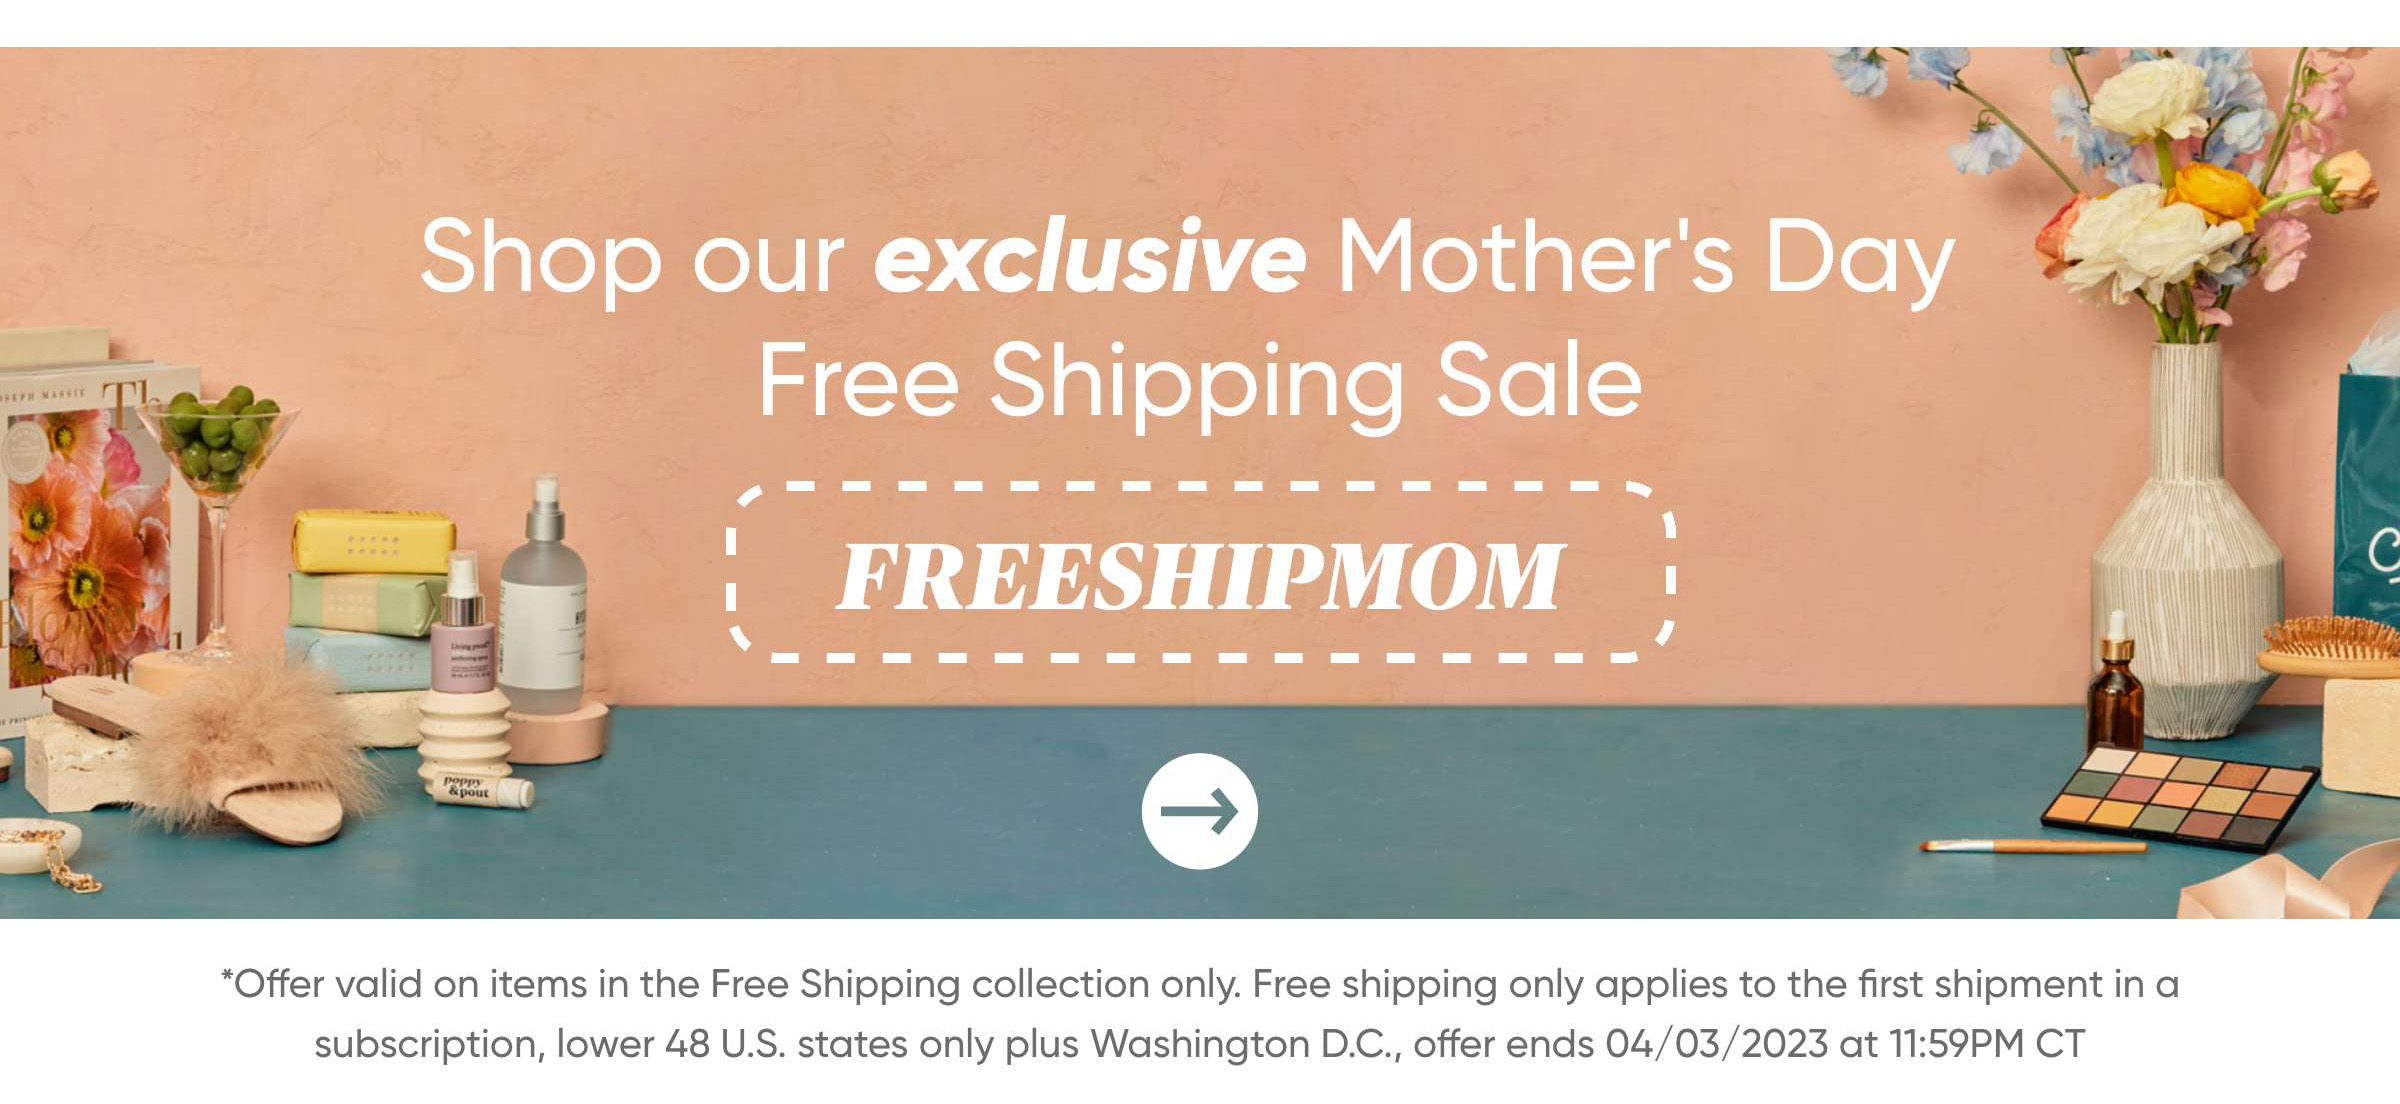 Shop our exclusive Mother's Day Free shipping sale code: FREESHIPMOM*Offer valid on items in the Free Shipping collection only. Free shipping only applies to the first shipment in a subscription, lower 48 U.S. states only plus Washington D.C., offer ends 04/03/2023 at 11:59PM CT